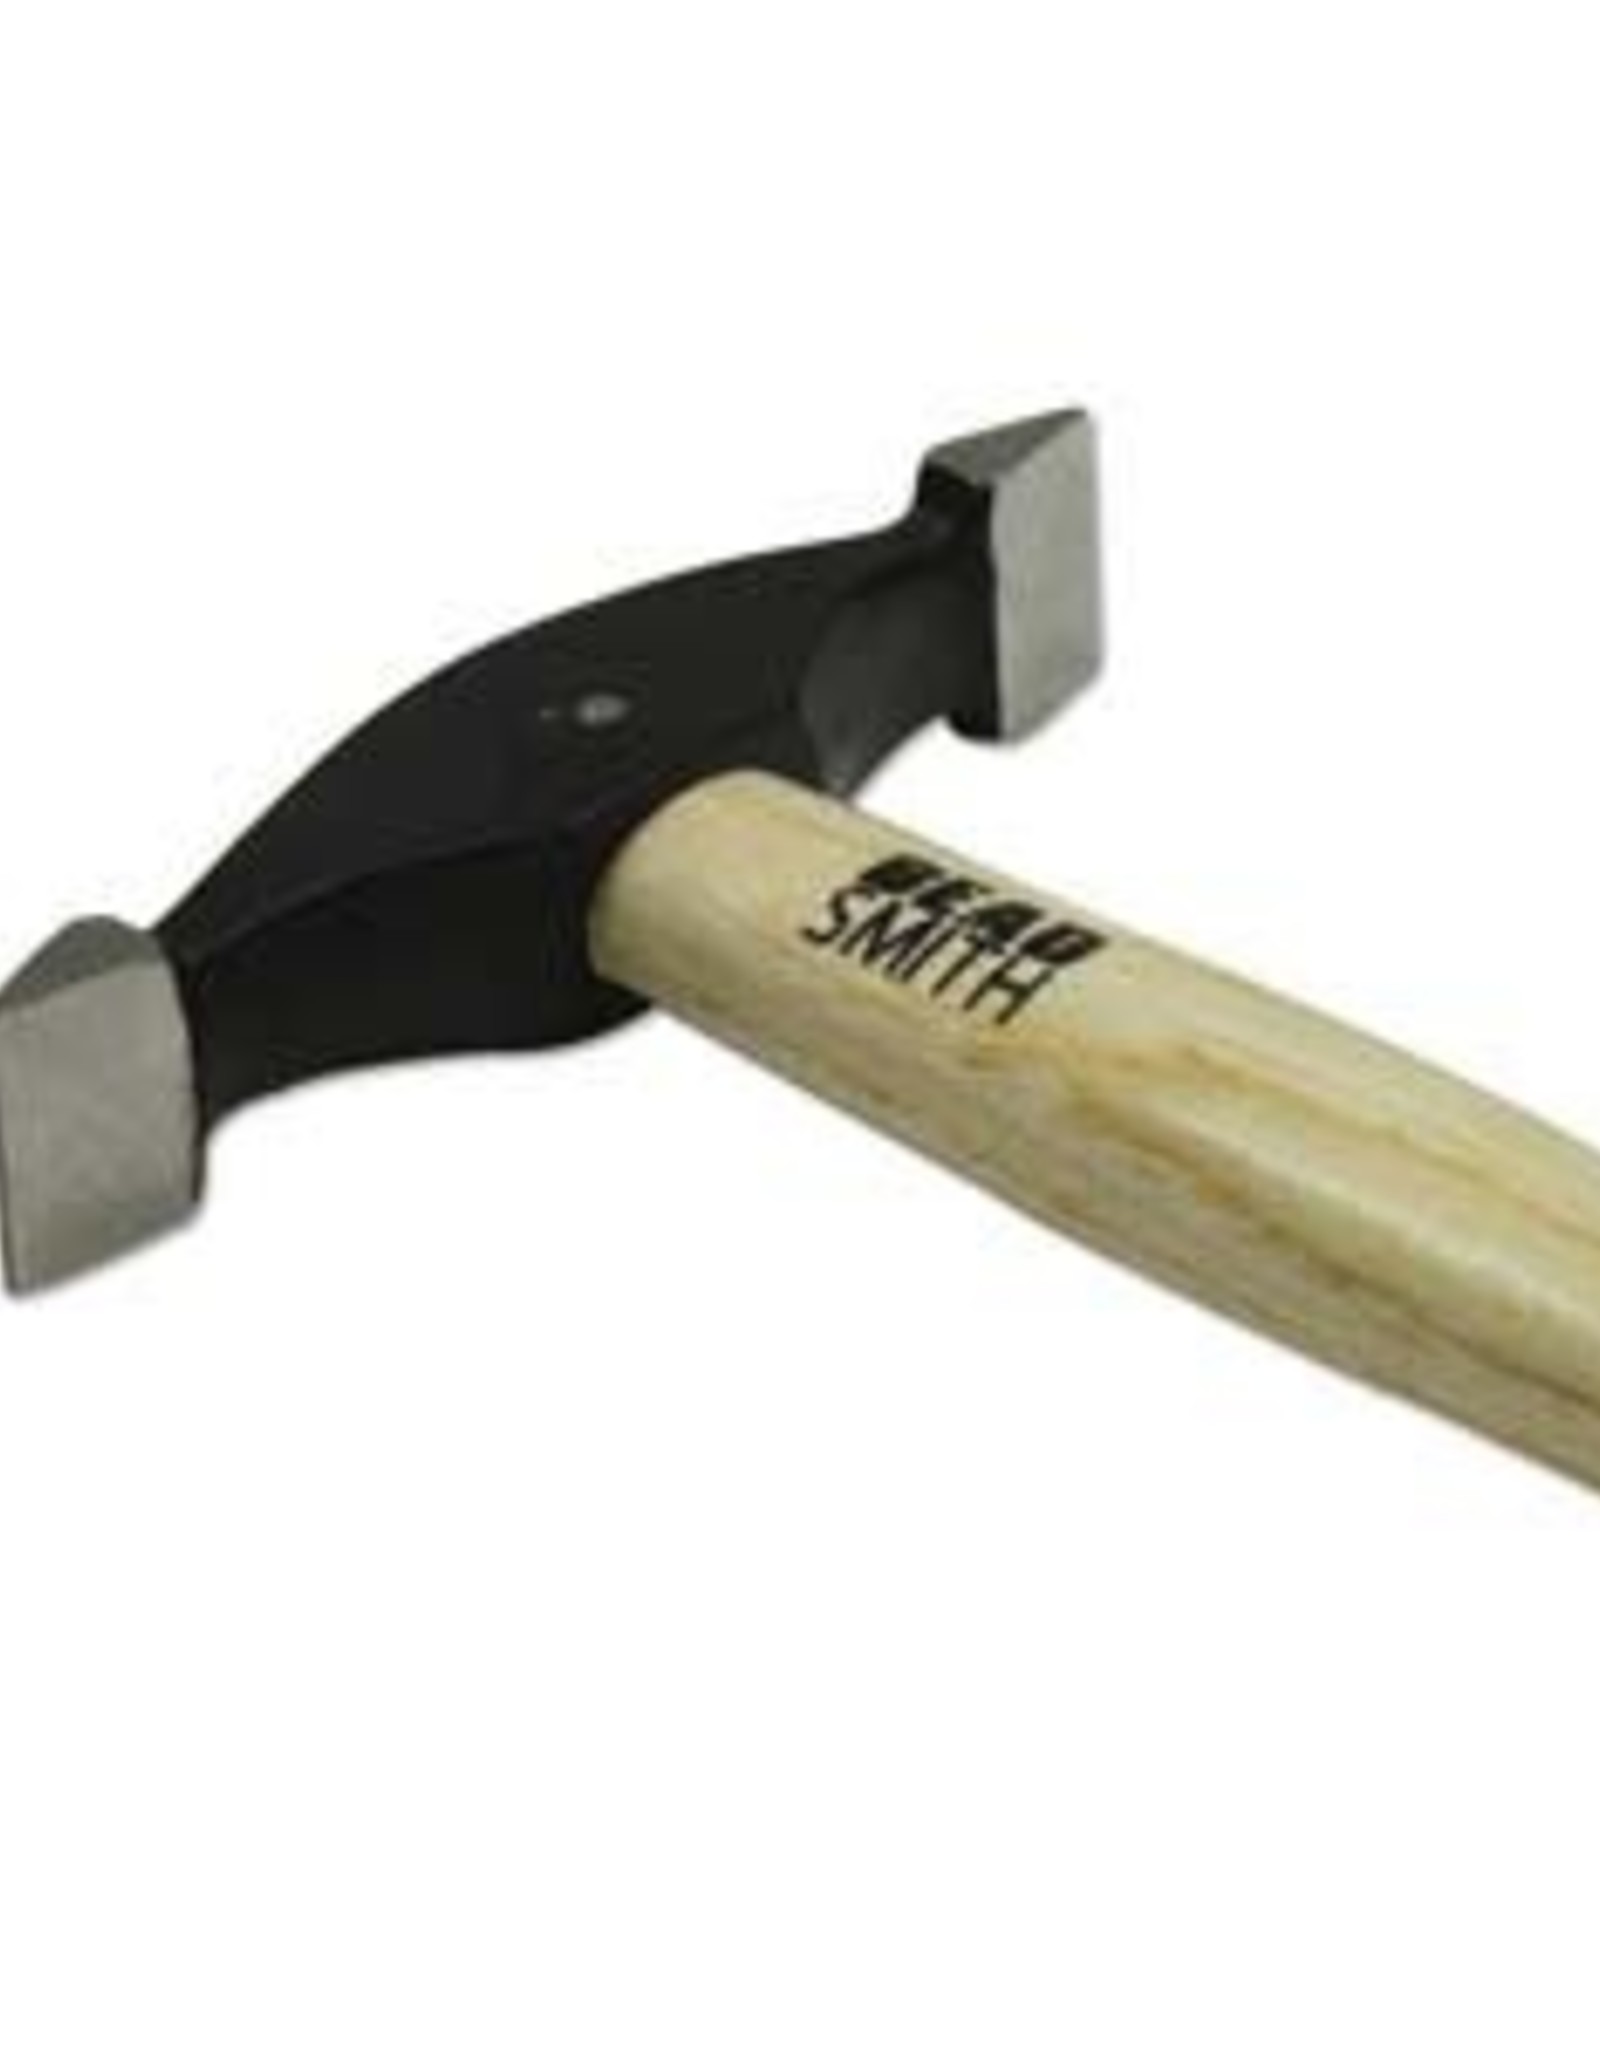 Beadsmith SHARP TEXTURING HAMMER TWO 14.5MM FACES